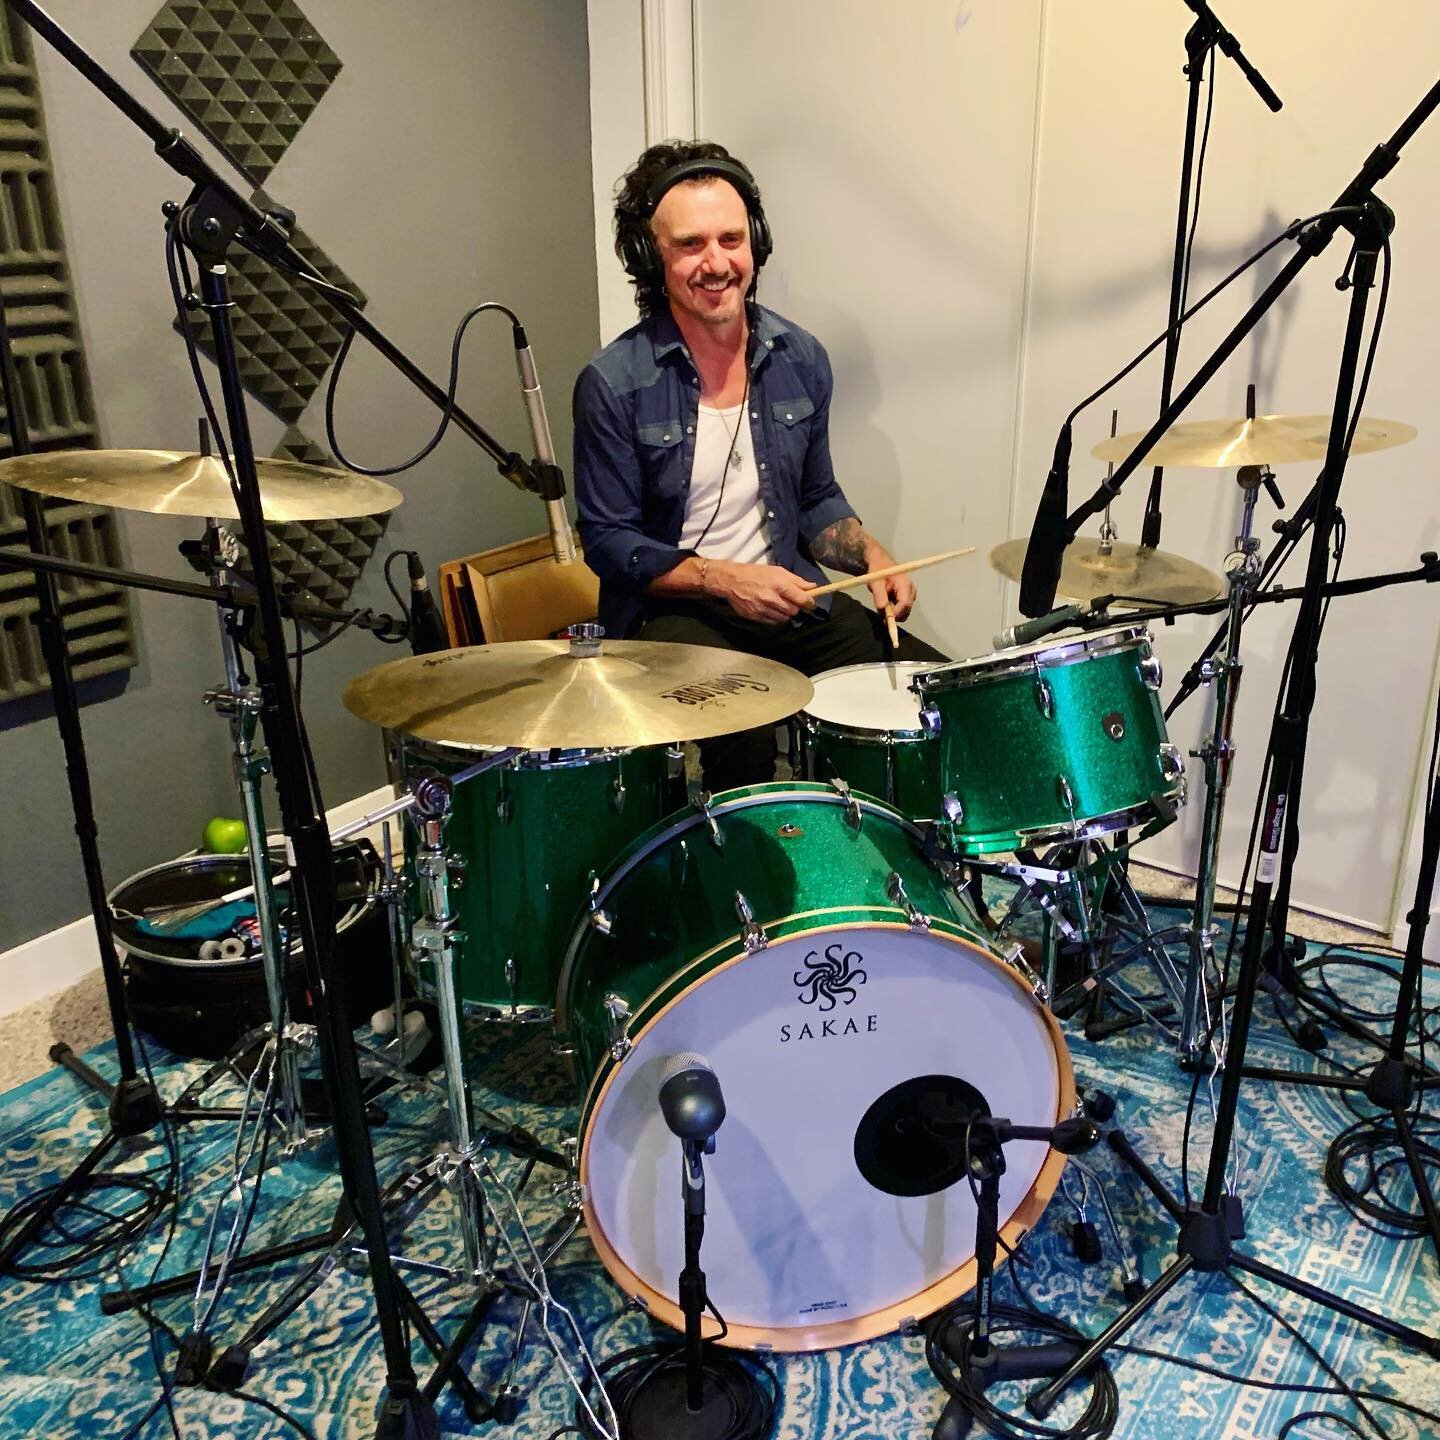 From a whisper to a roar this man @rickardtl has Swing! Another incredible day of tracking Drums and Bass for #windowtotheworld #bravesongs #sunstudio